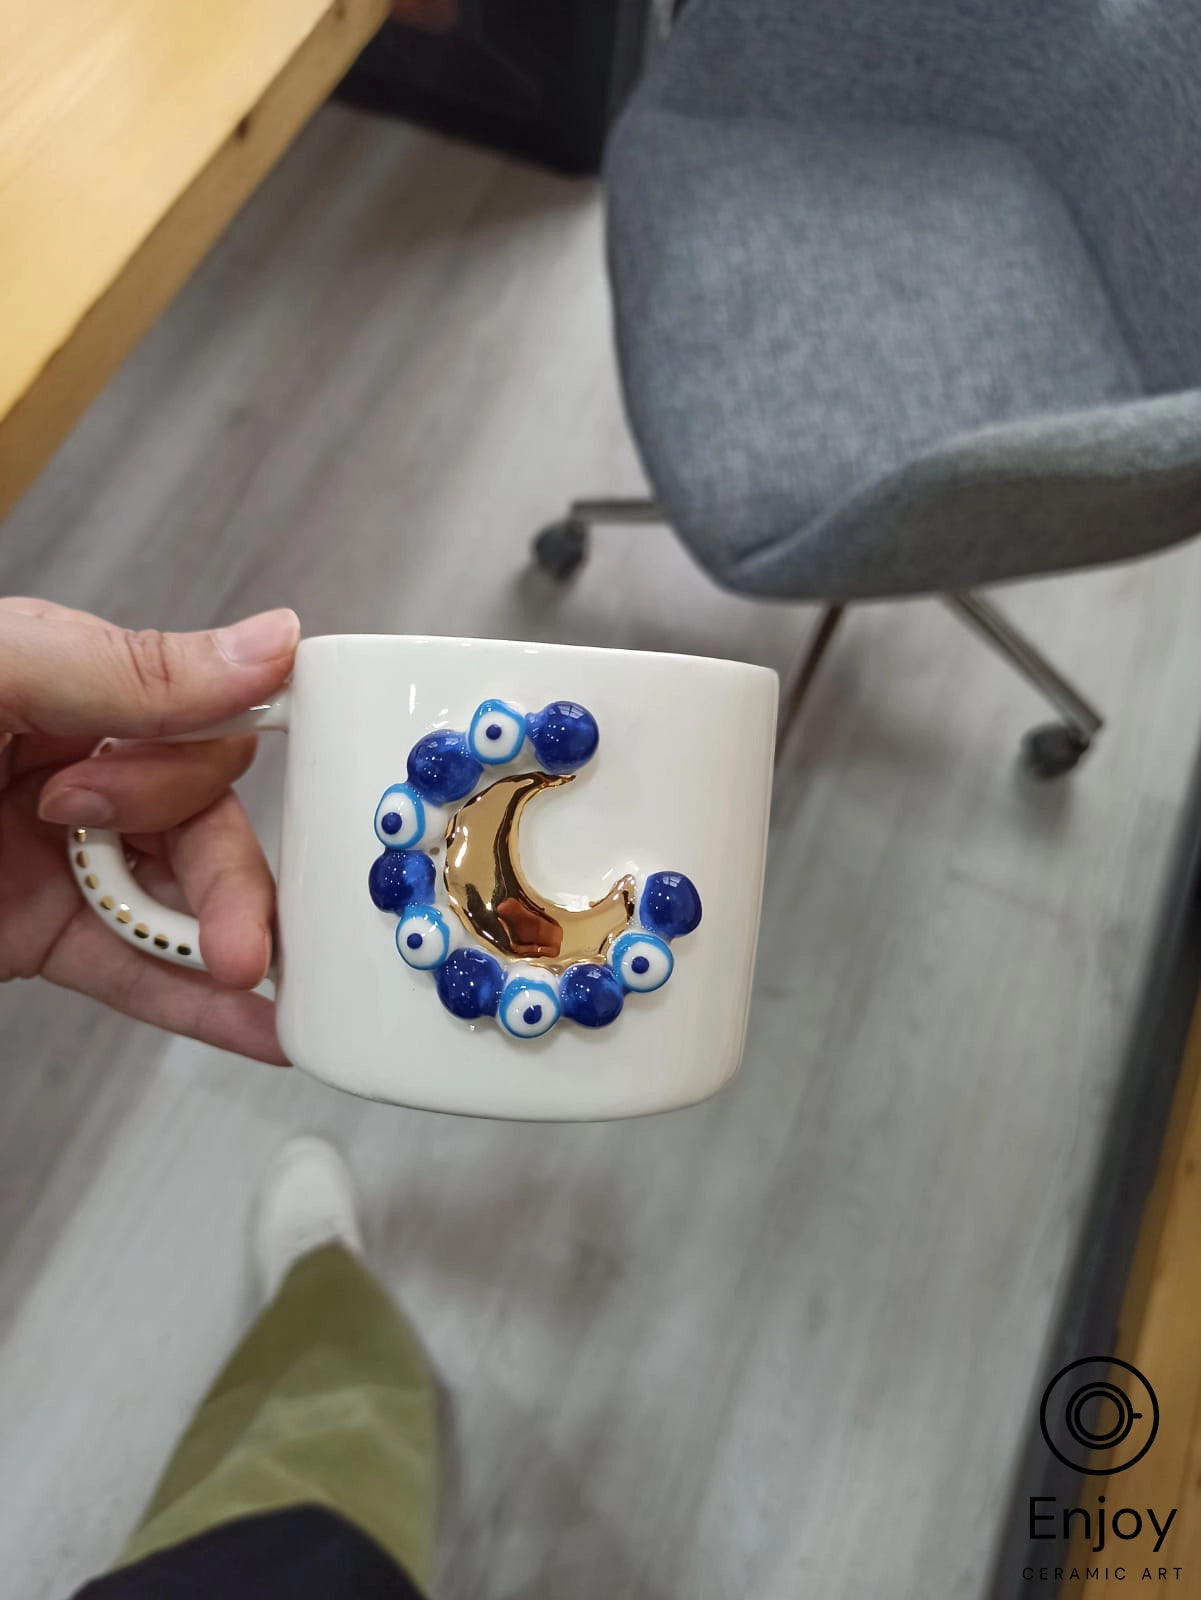 A hand holding a 'Blue Moon' ceramic mug, detailed with a golden crescent and blue evil eye beads, in an office setting with a gray chair and wooden desk in the background.